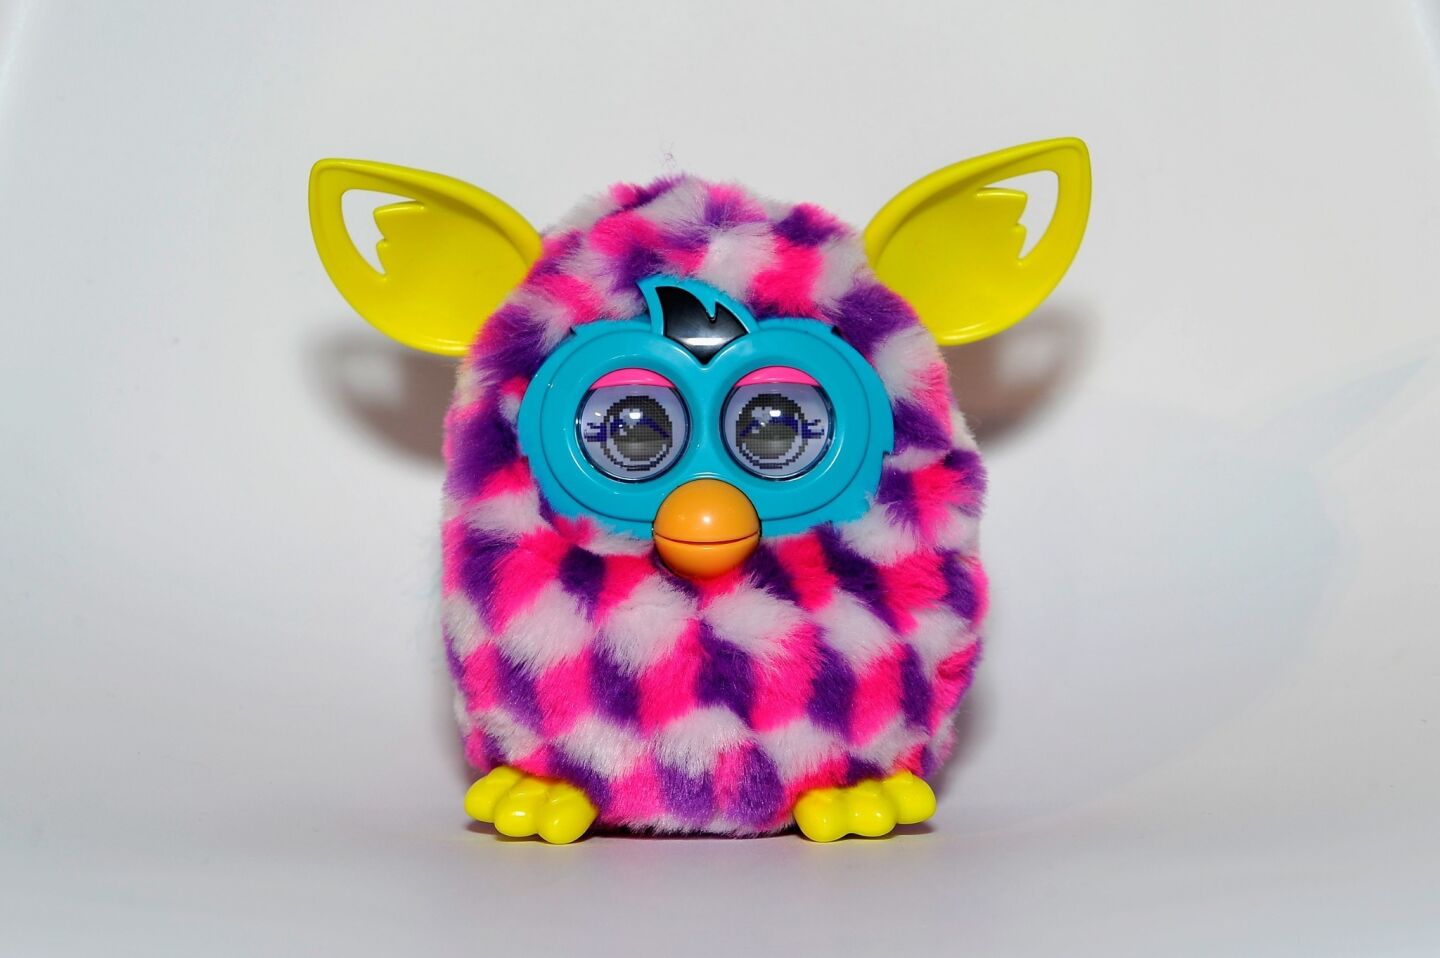 6. Furby. The new Furby Boom toy mixes physical play with digital elements. In addition to the NRF list, it also made it onto Wal-Mart's top toys list.